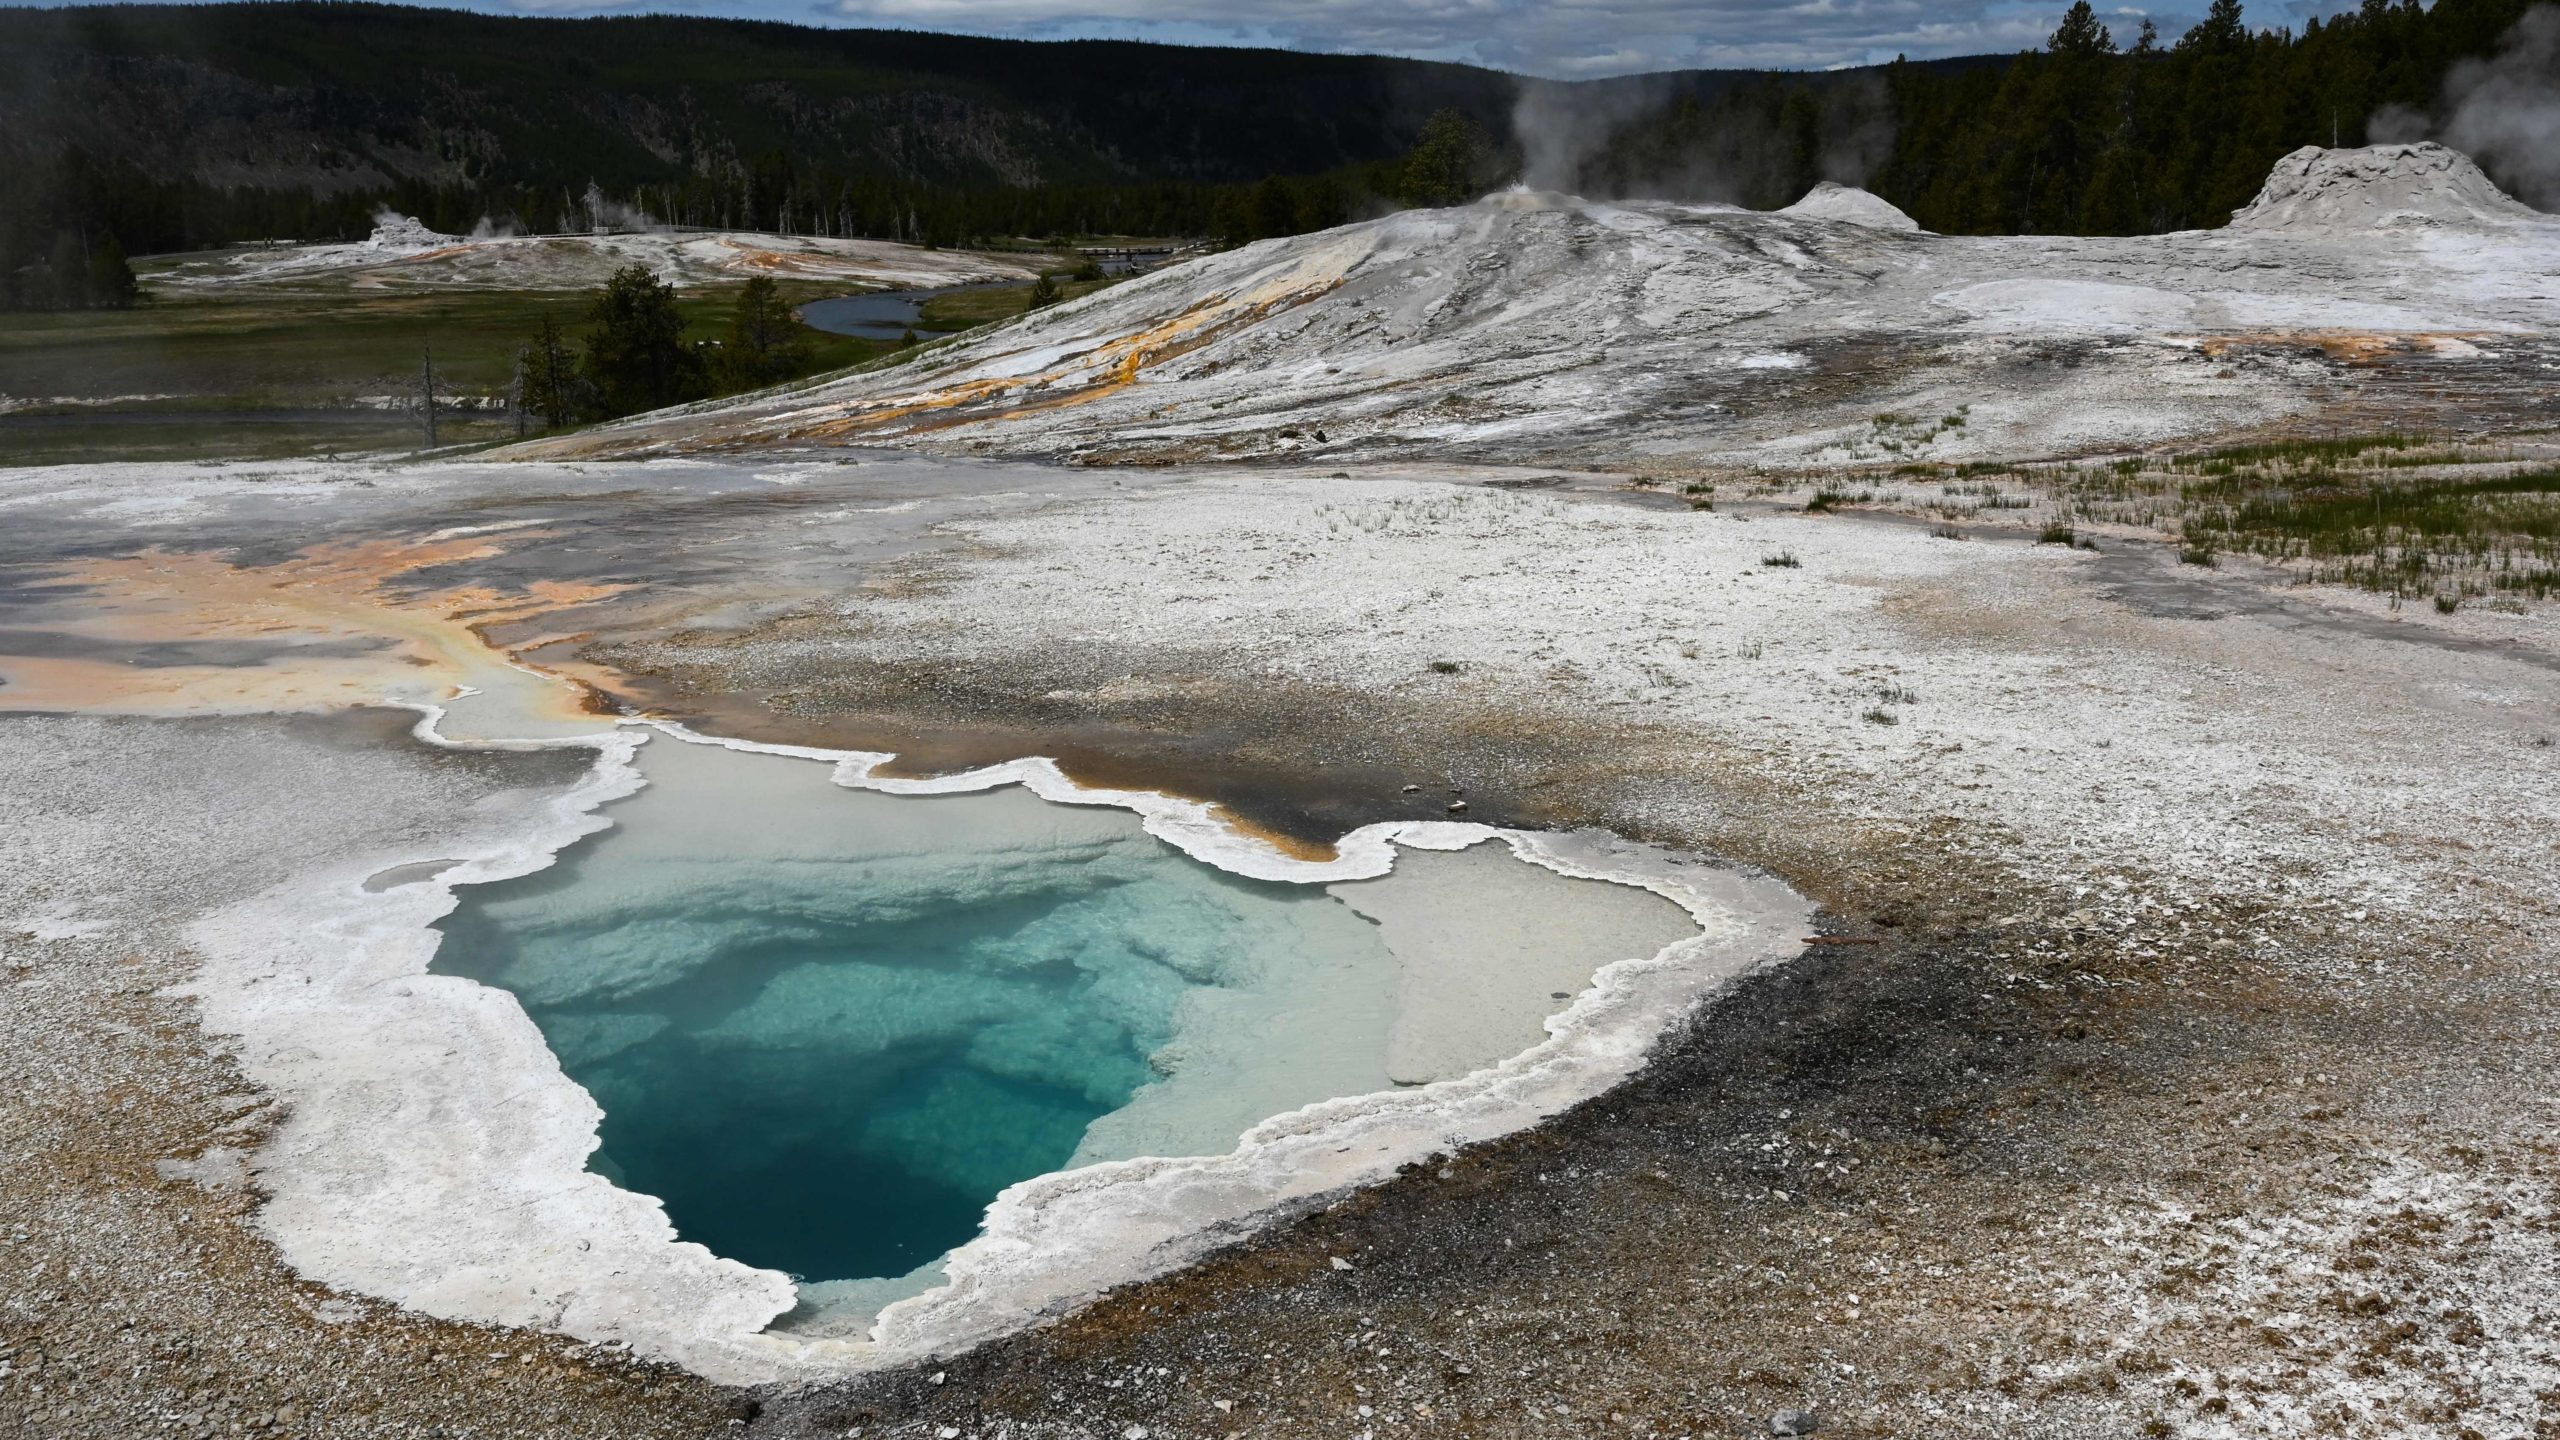 Heart Spring, one of many geysers in Yellowstone National Park, is seen in Wyoming on June 11, 2019. (Photo: Daniel Slim, Getty Images)